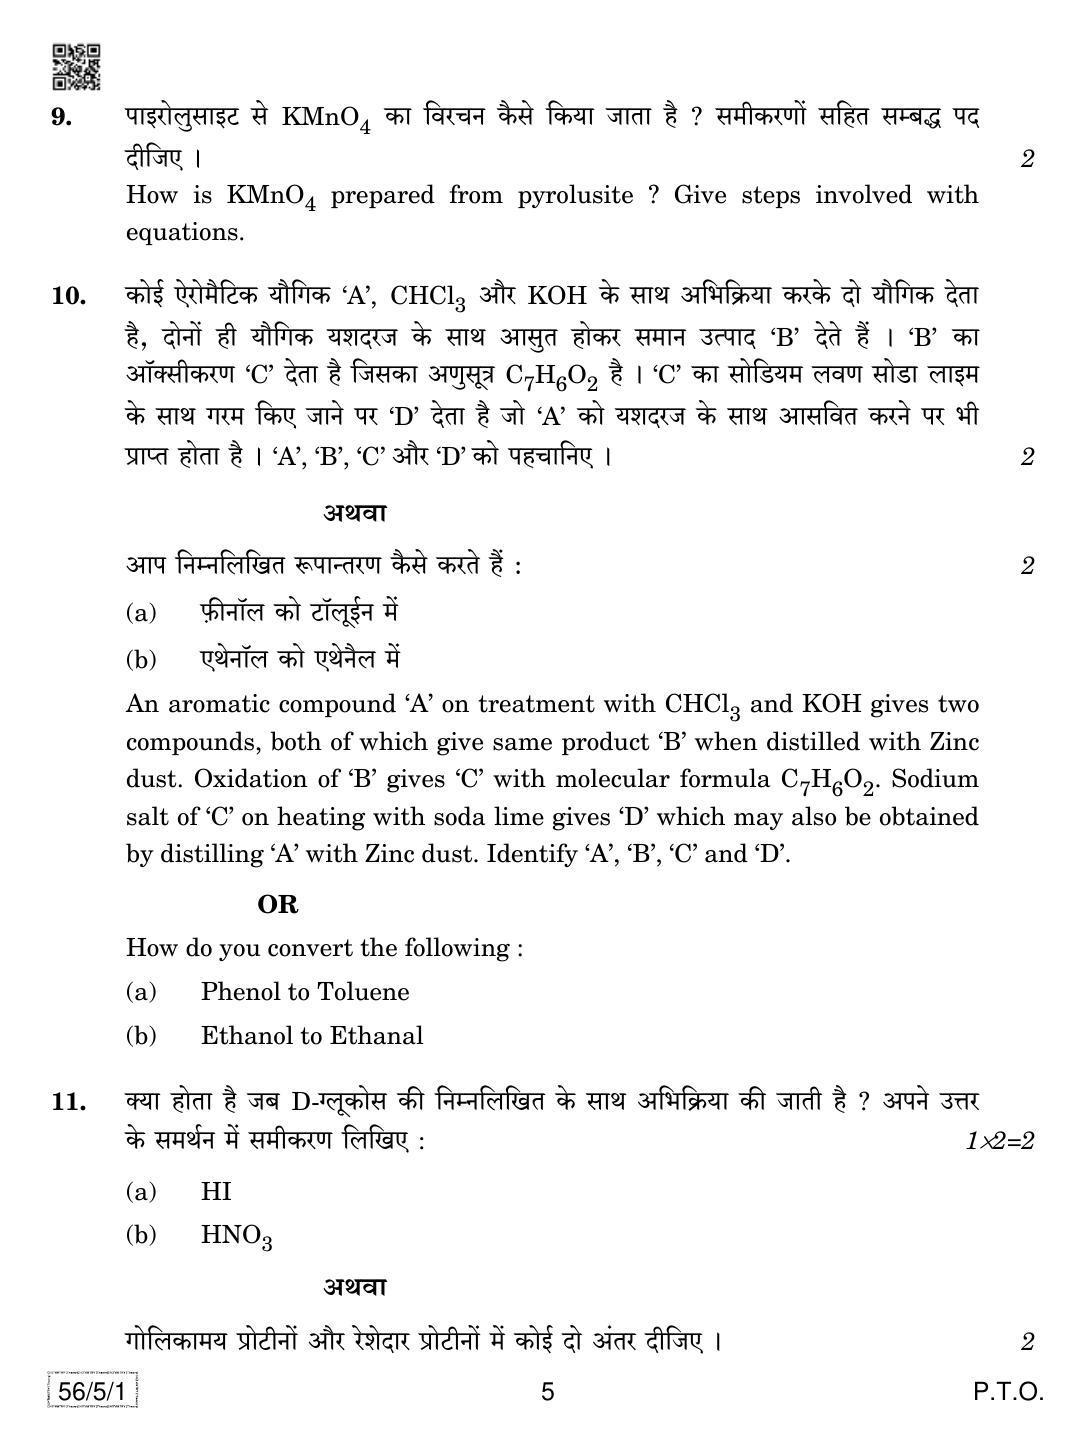 CBSE Class 12 56-5-1 Chemistry 2019 Question Paper - Page 5